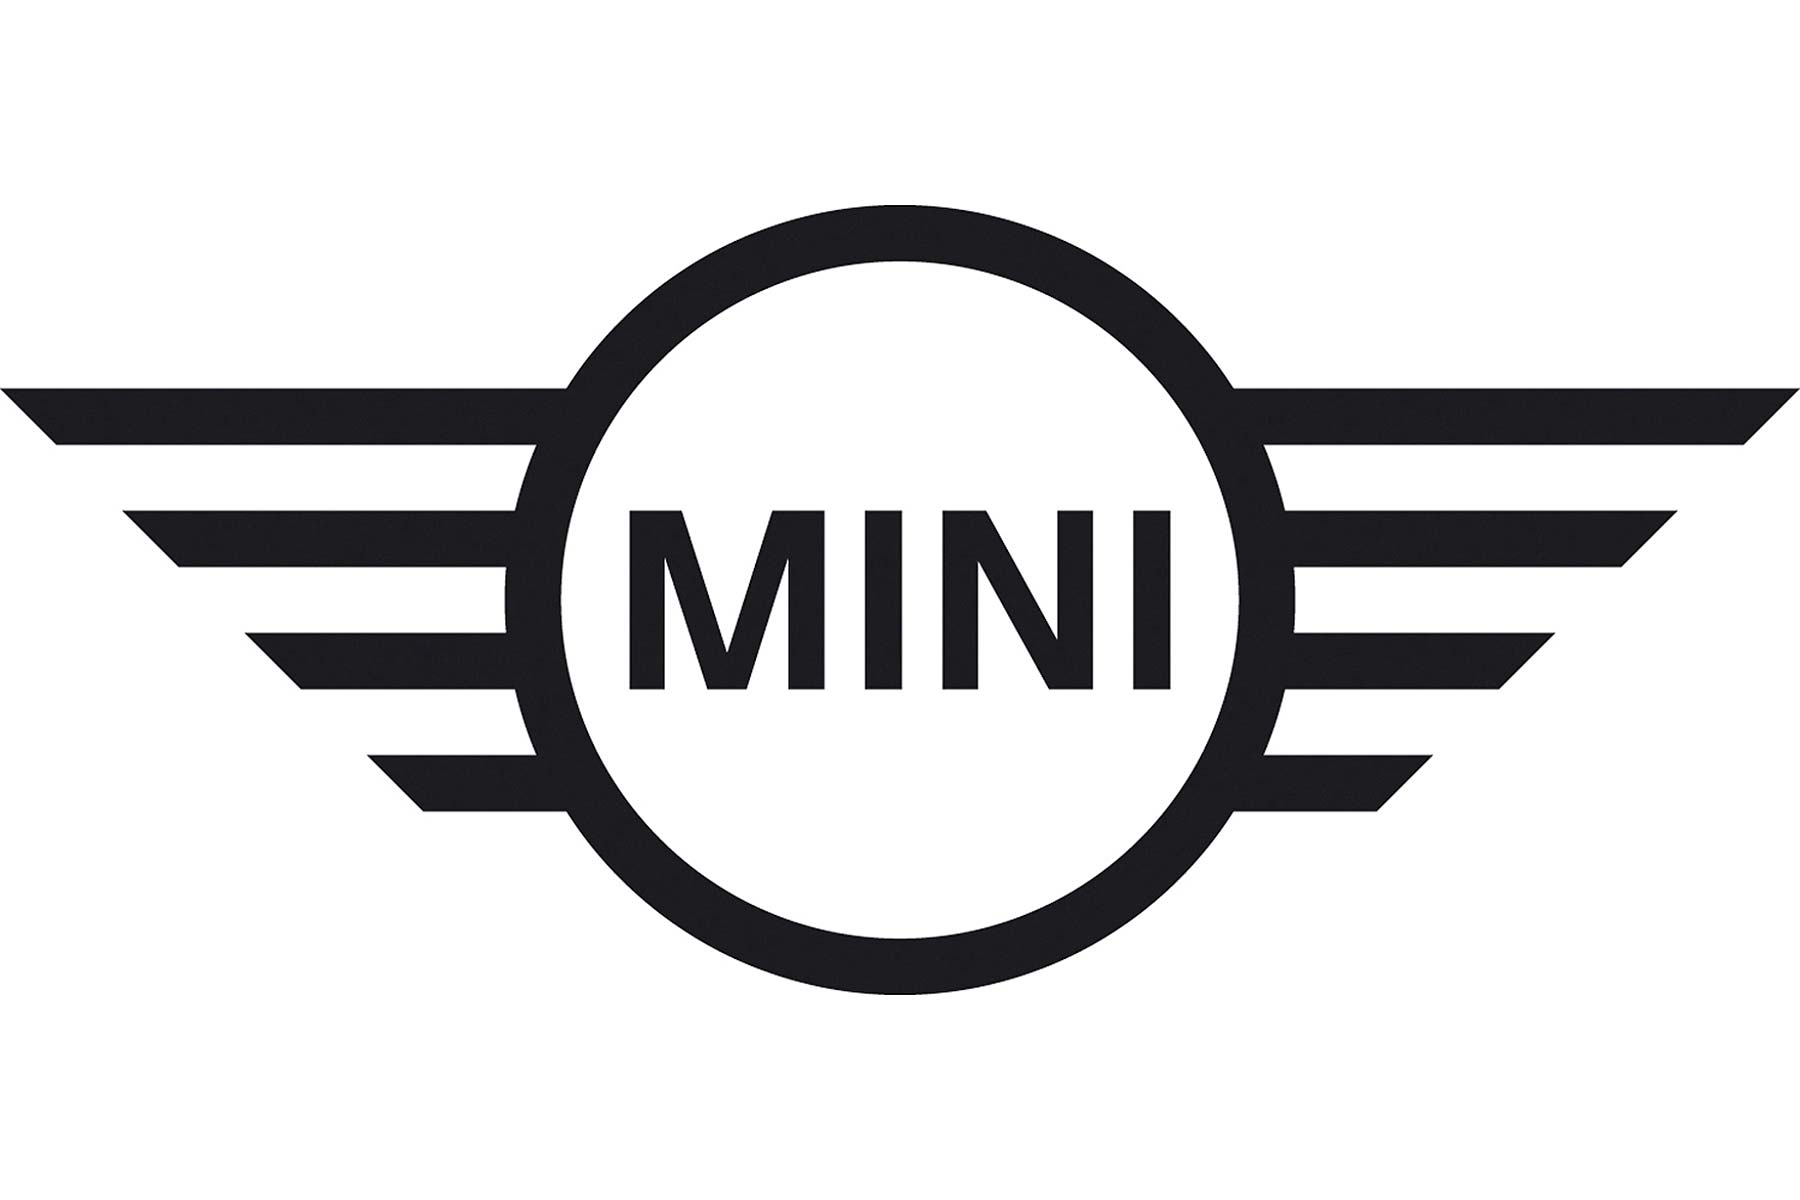 Mini Logo - Mini is getting a new logo for 2018 | Motoring Research